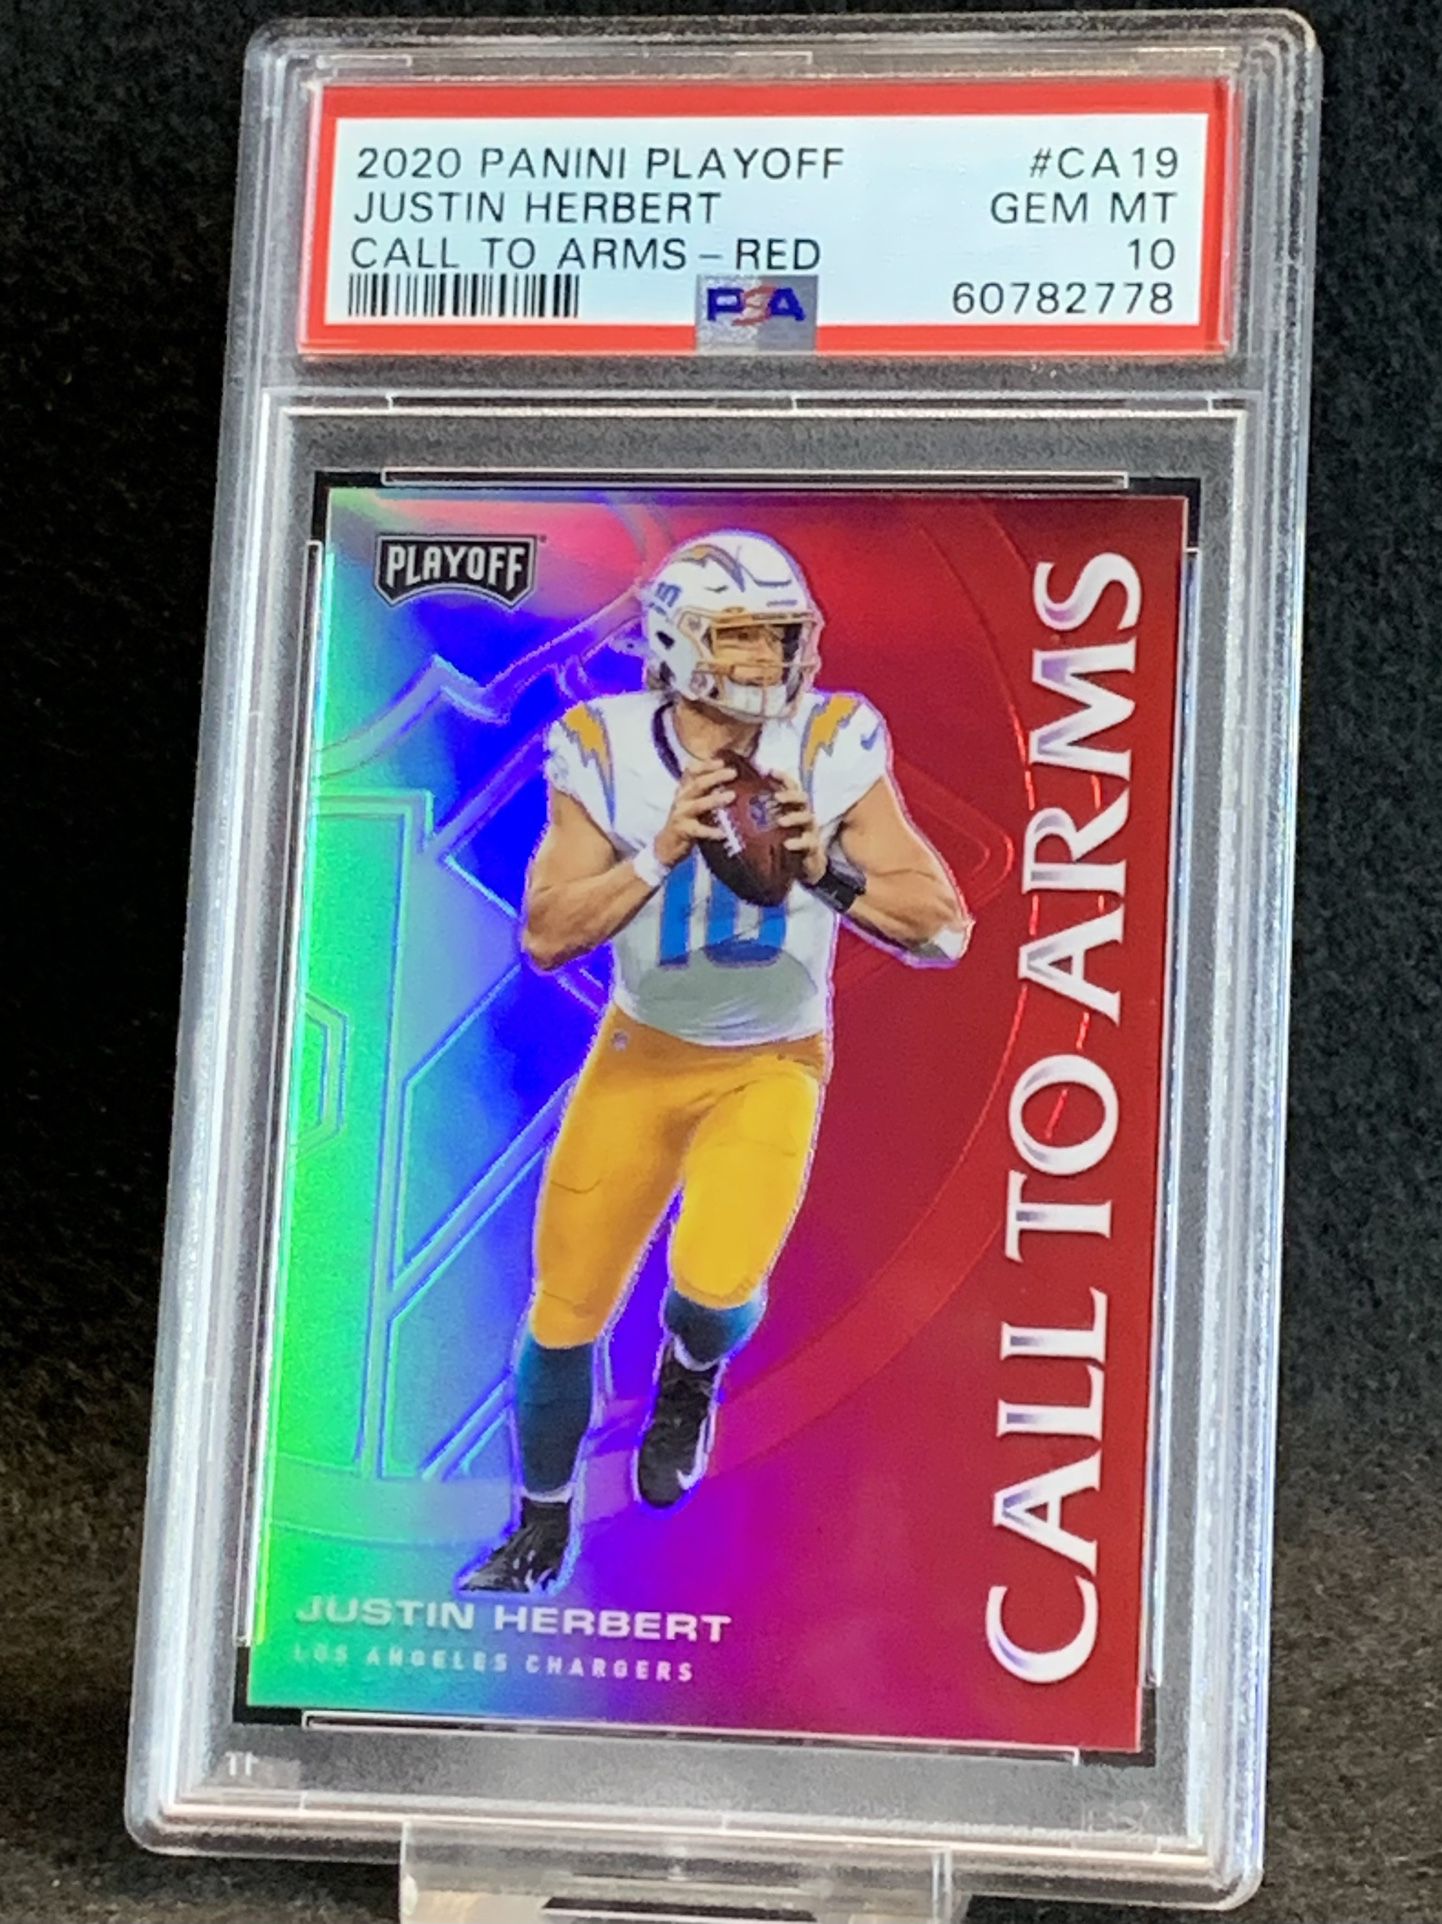 2020 Playoff ⚡️ Justin Herbert ⚡️ Call To Arms Rookie RED Prizm PSA 10 💎 Mint - Los Angeles Chargers 